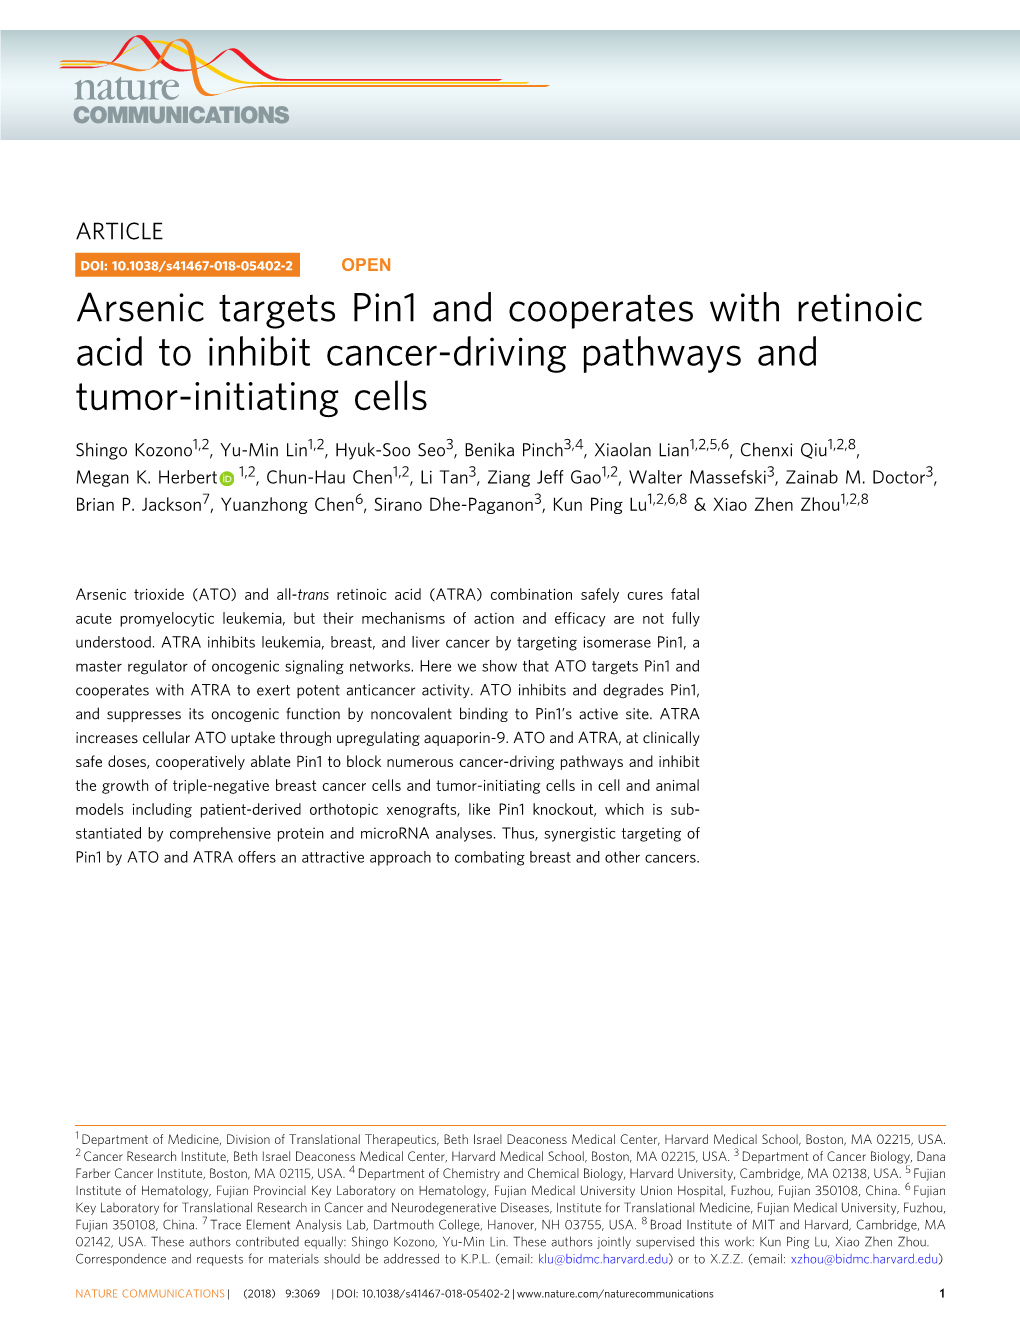 Arsenic Targets Pin1 and Cooperates with Retinoic Acid to Inhibit Cancer-Driving Pathways and Tumor-Initiating Cells